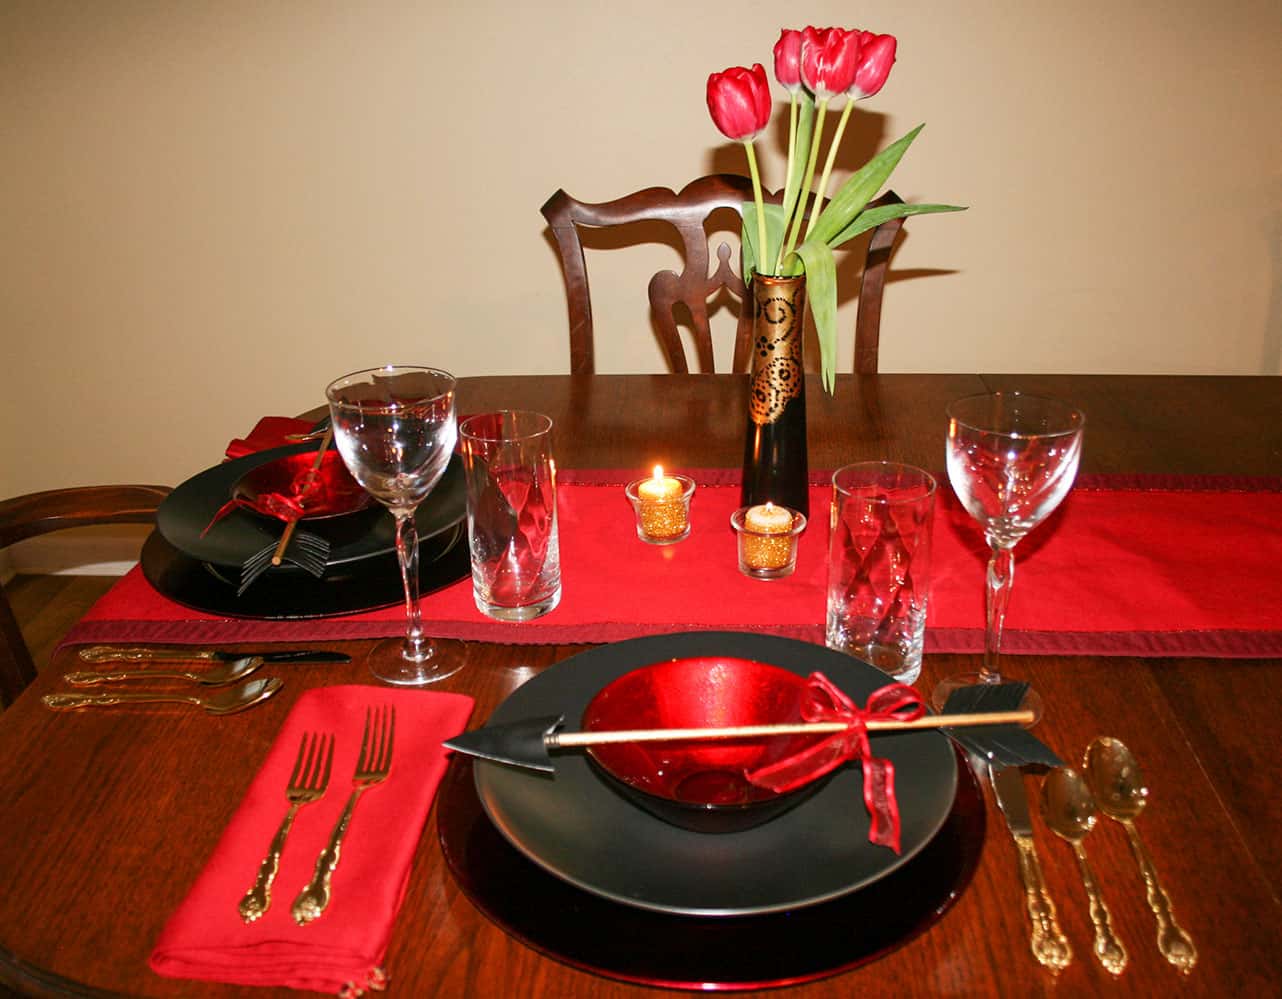 How to Make a Romantic Table Setting for Two